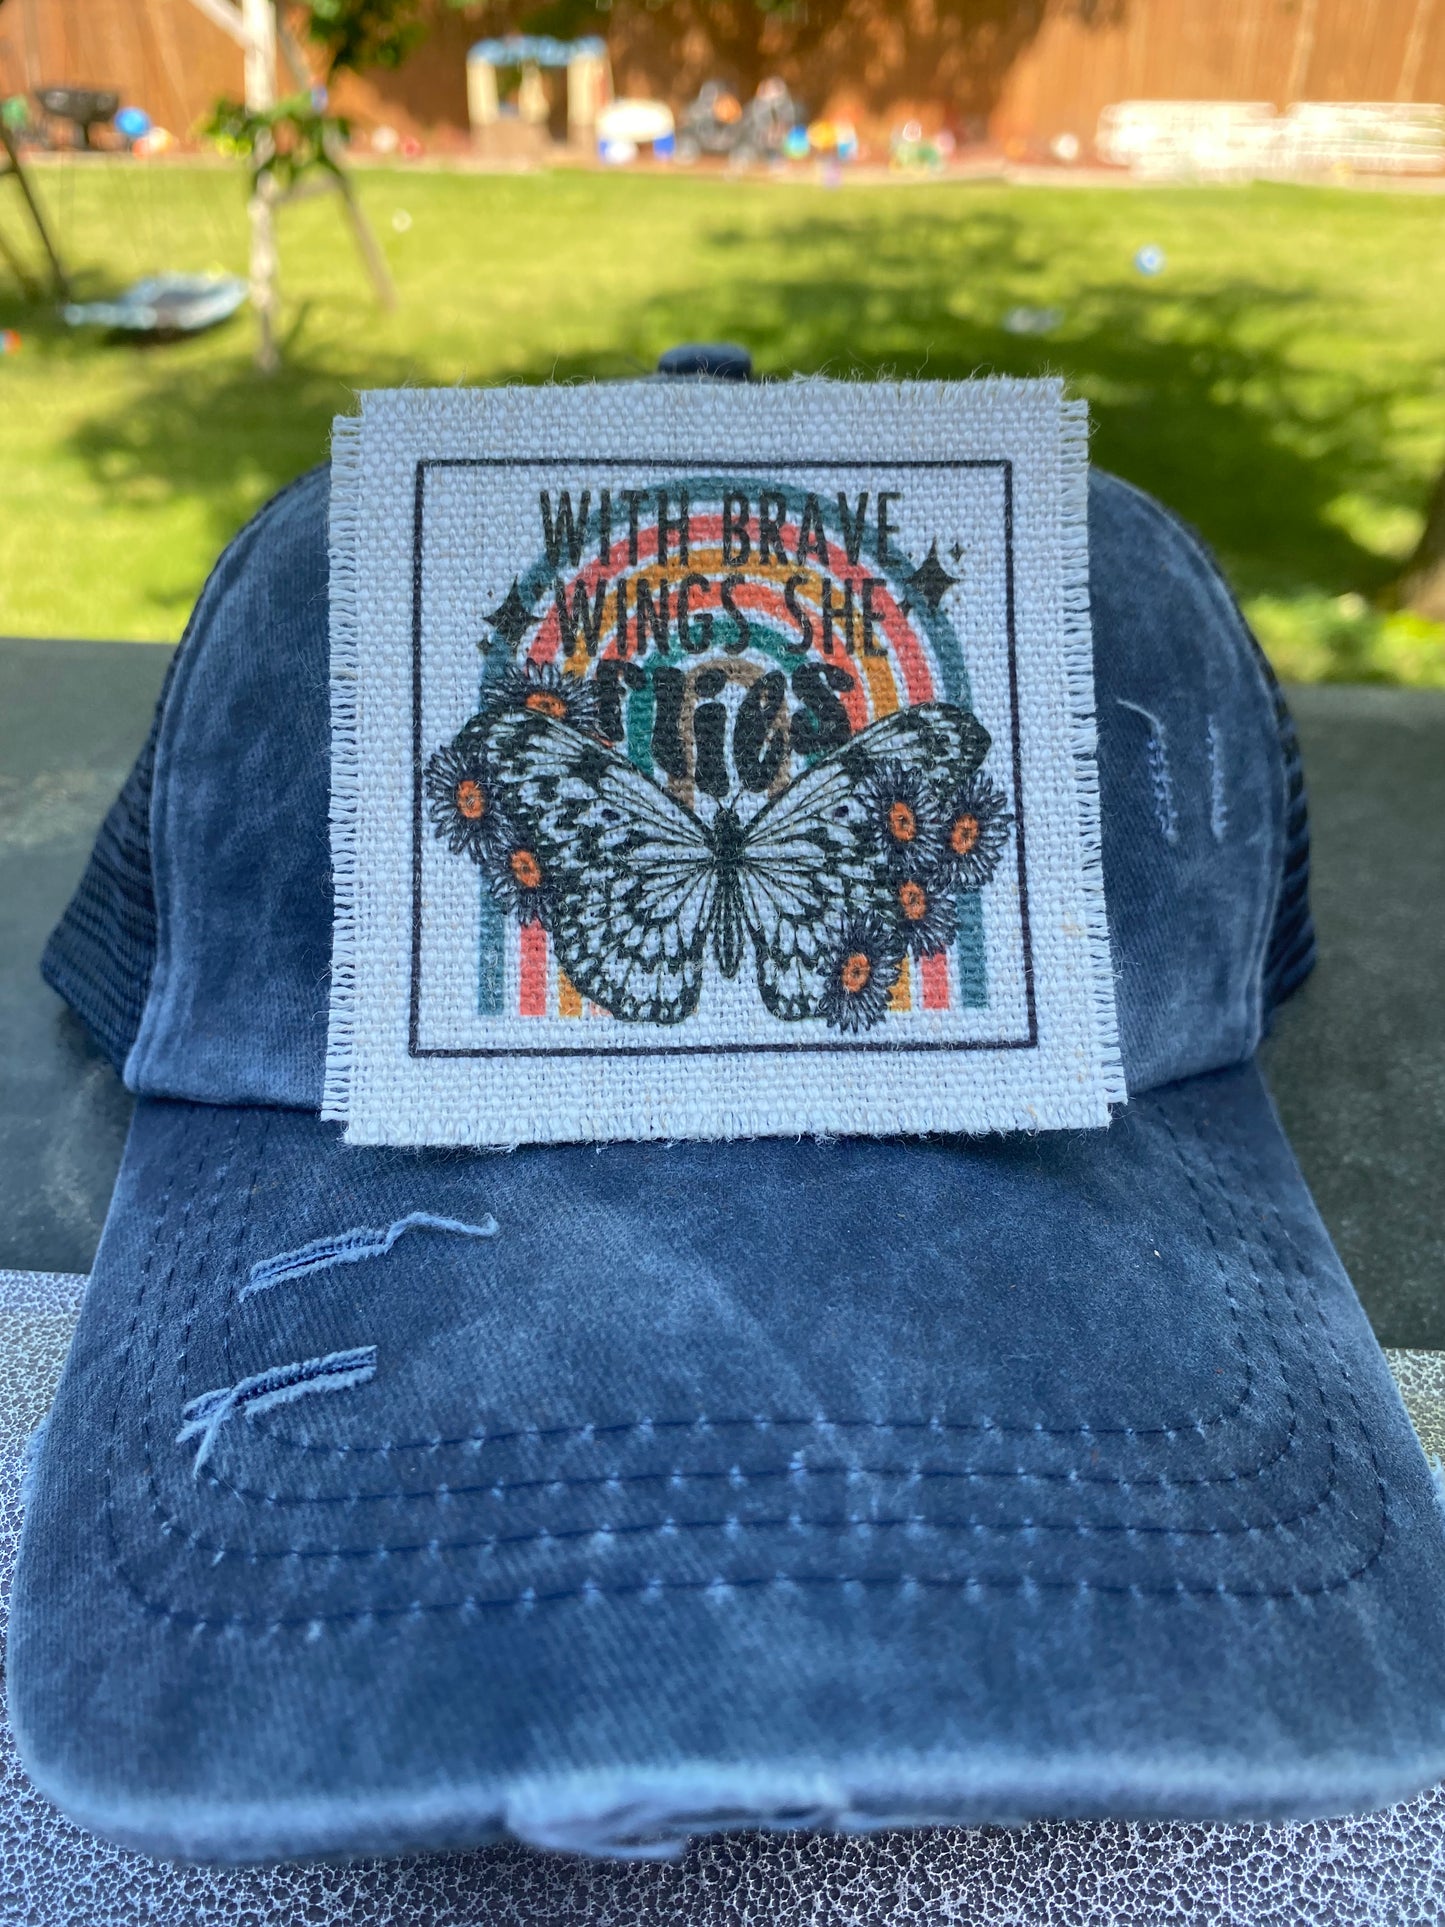 With Brave Wings She Flies Hat Patch